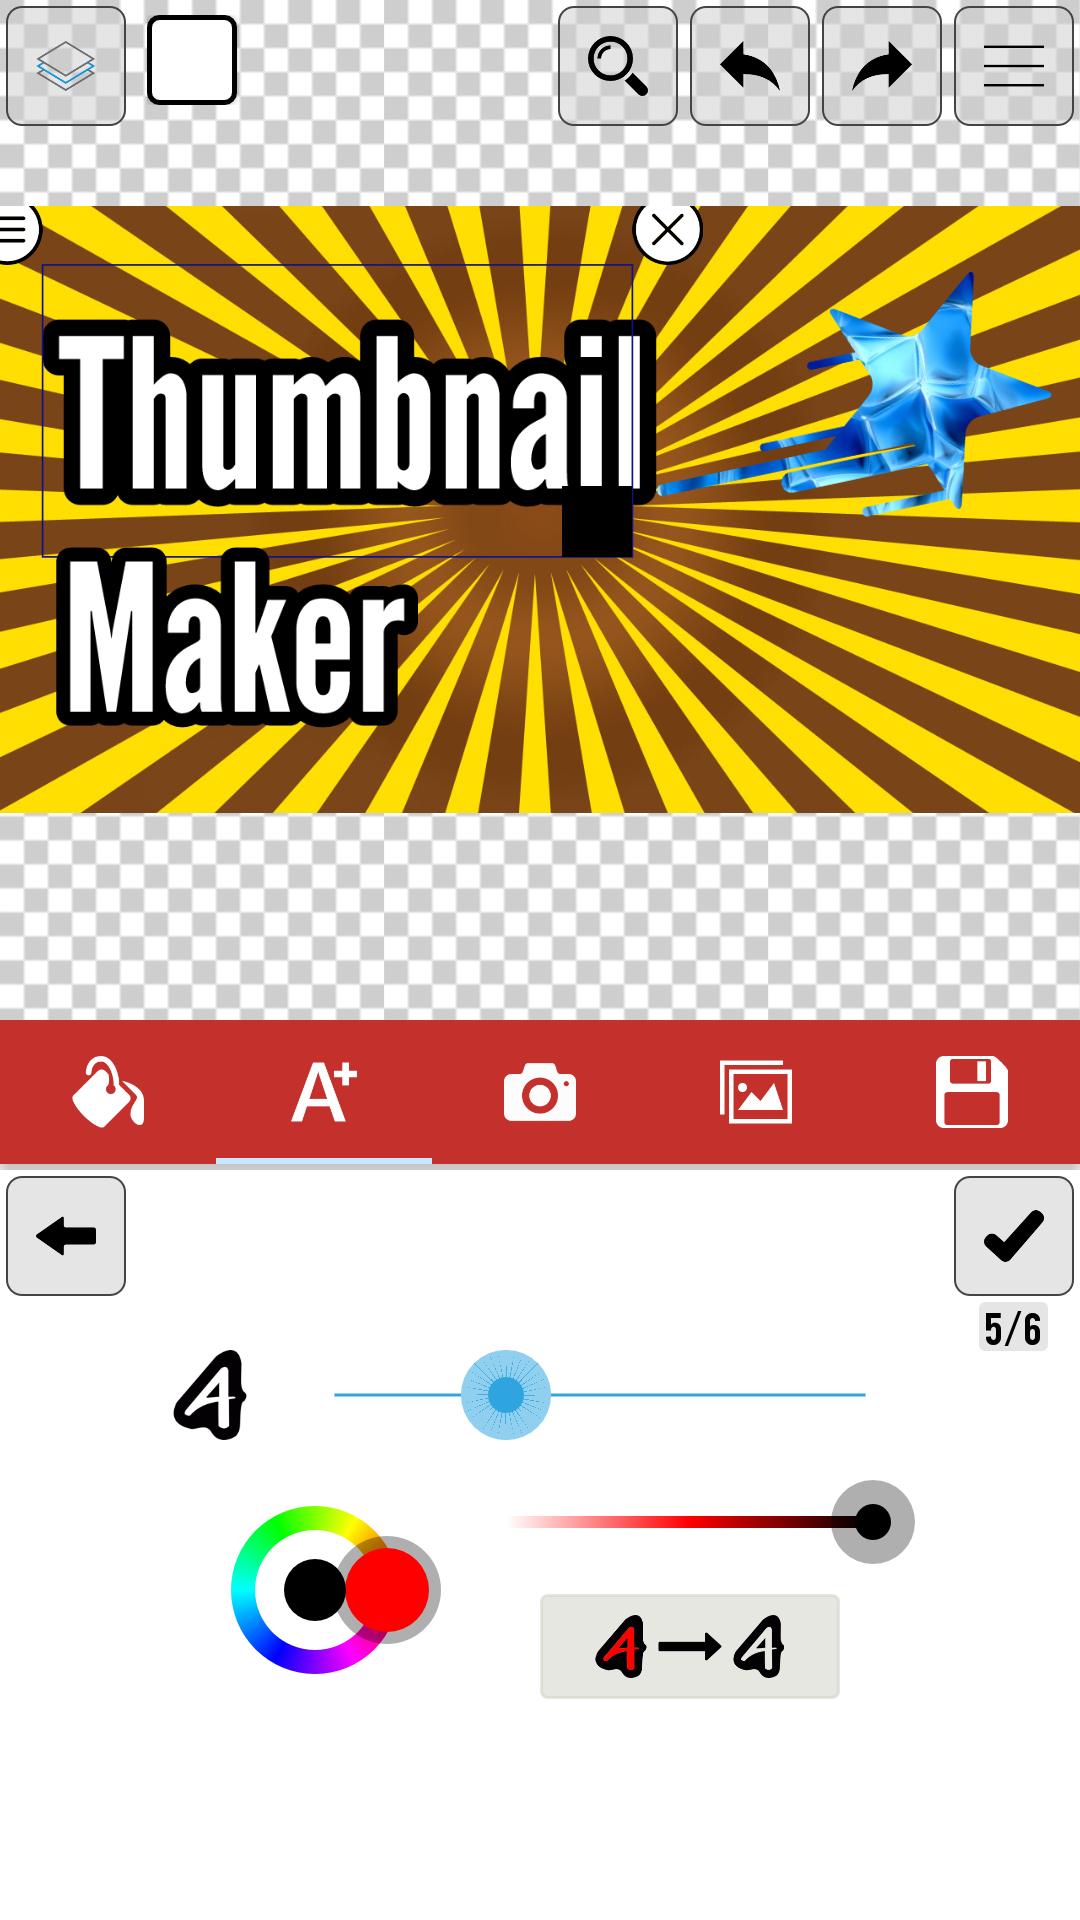 Thumbnail Maker For Android Apk Download